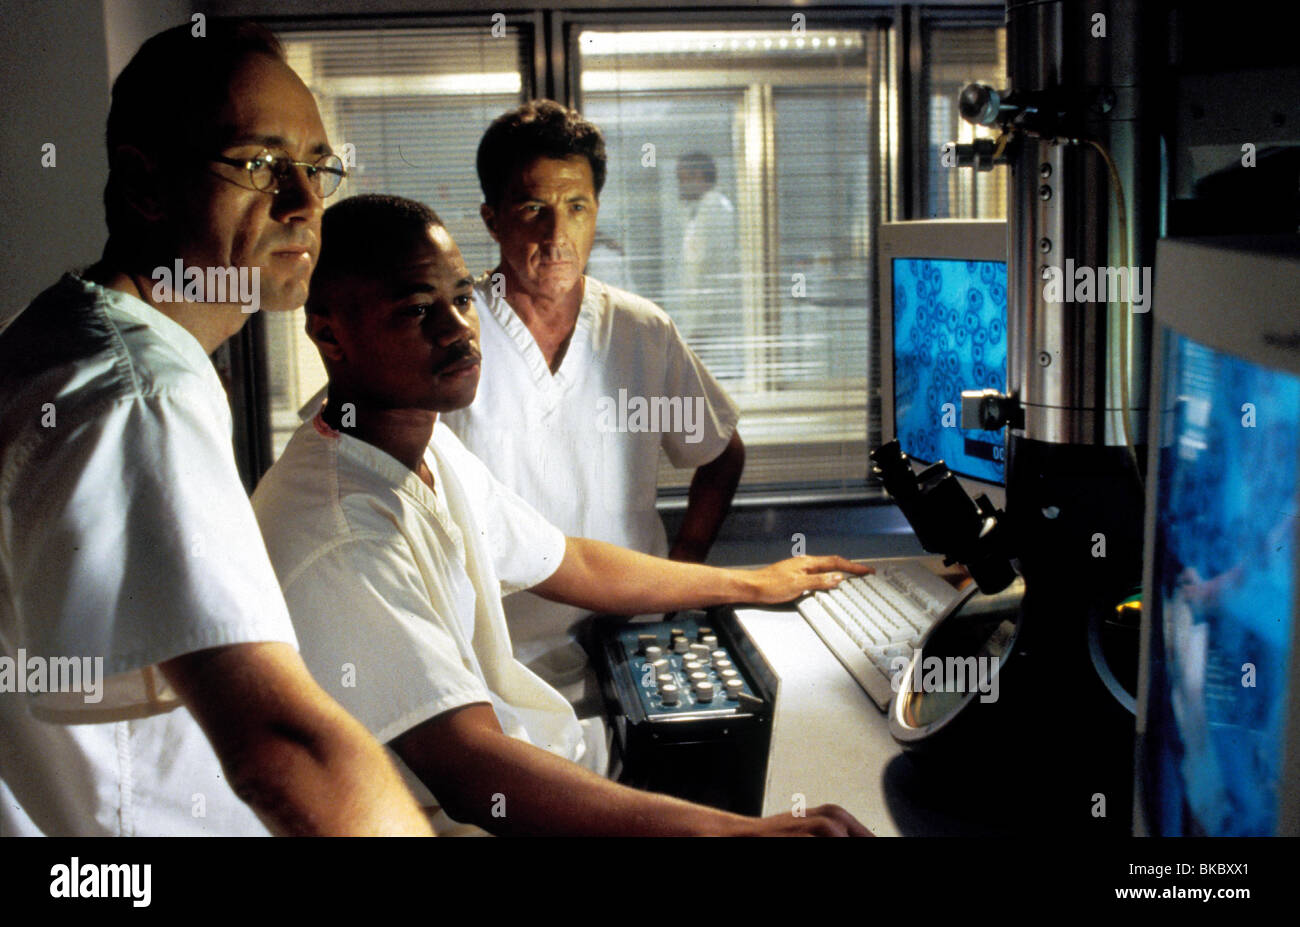 OUTBREAK (1995) KEVIN SPACEY, CUBA GOODING JR, DUSTIN HOFFMAN OBK 115 Stock Photo